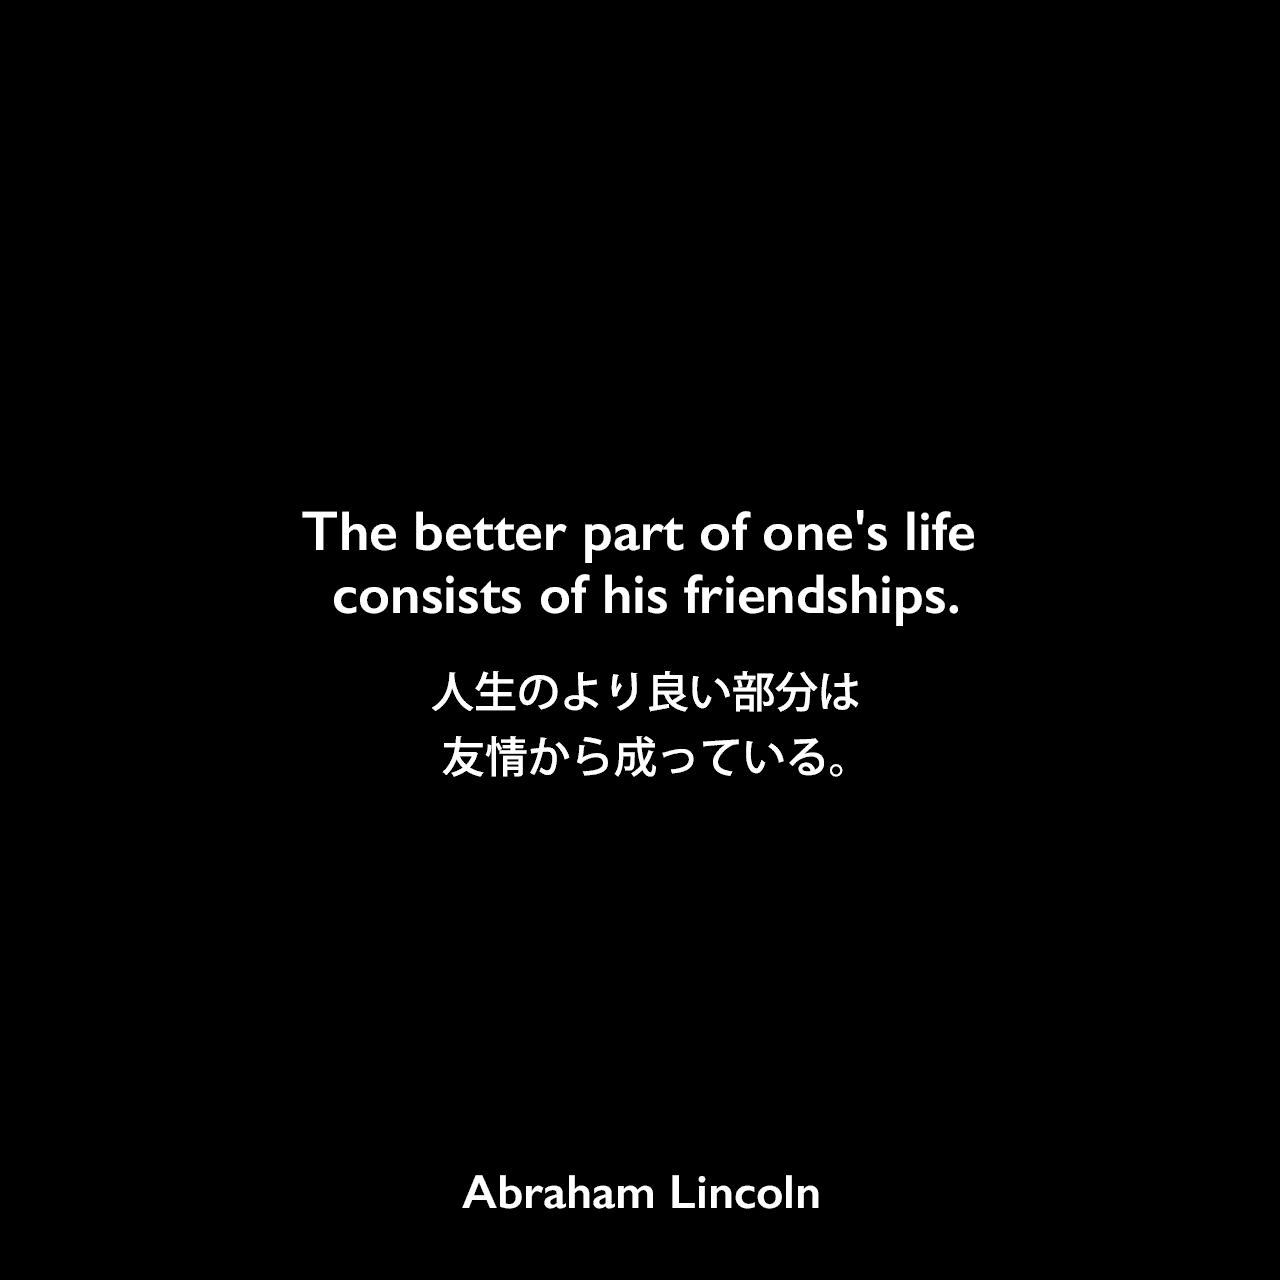 The better part of one's life consists of his friendships.人生のより良い部分は、友情から成っている。- Joseph Gillespieに宛てた手紙（1849年）よりAbraham Lincoln